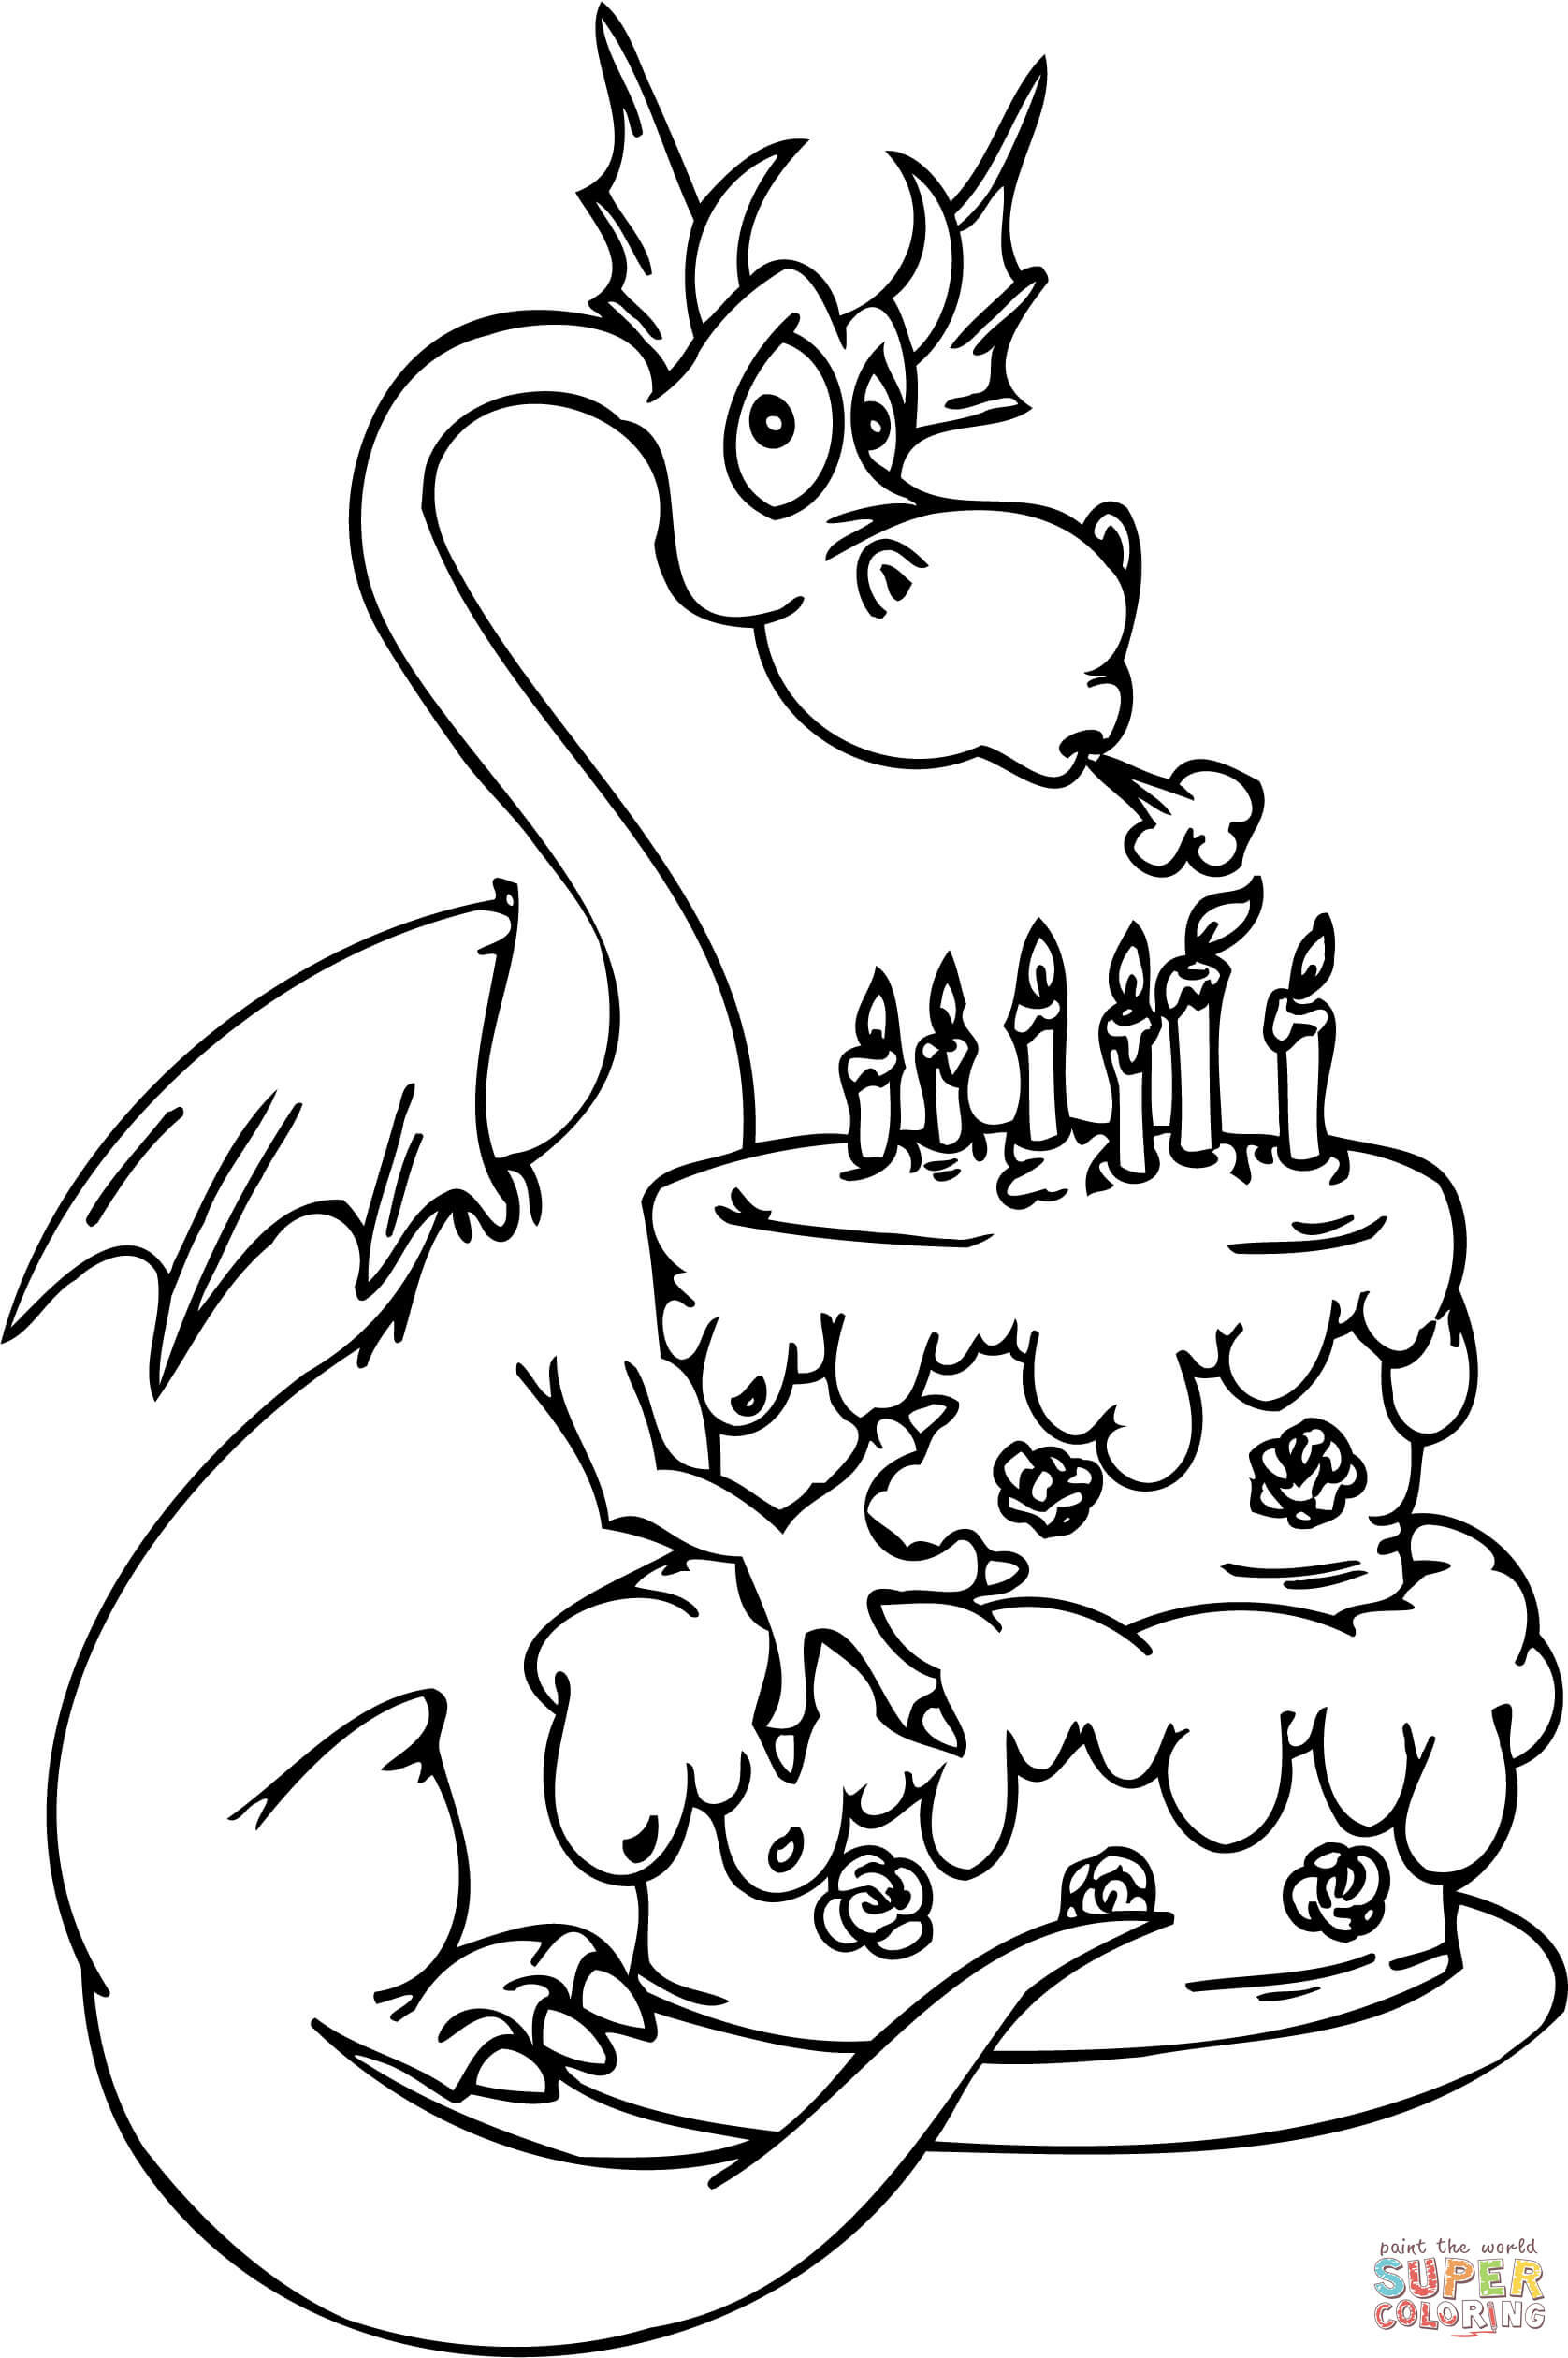 Happy Birthday Girl Coloring Pages
 Dragon with Happy Birthday Cake coloring page